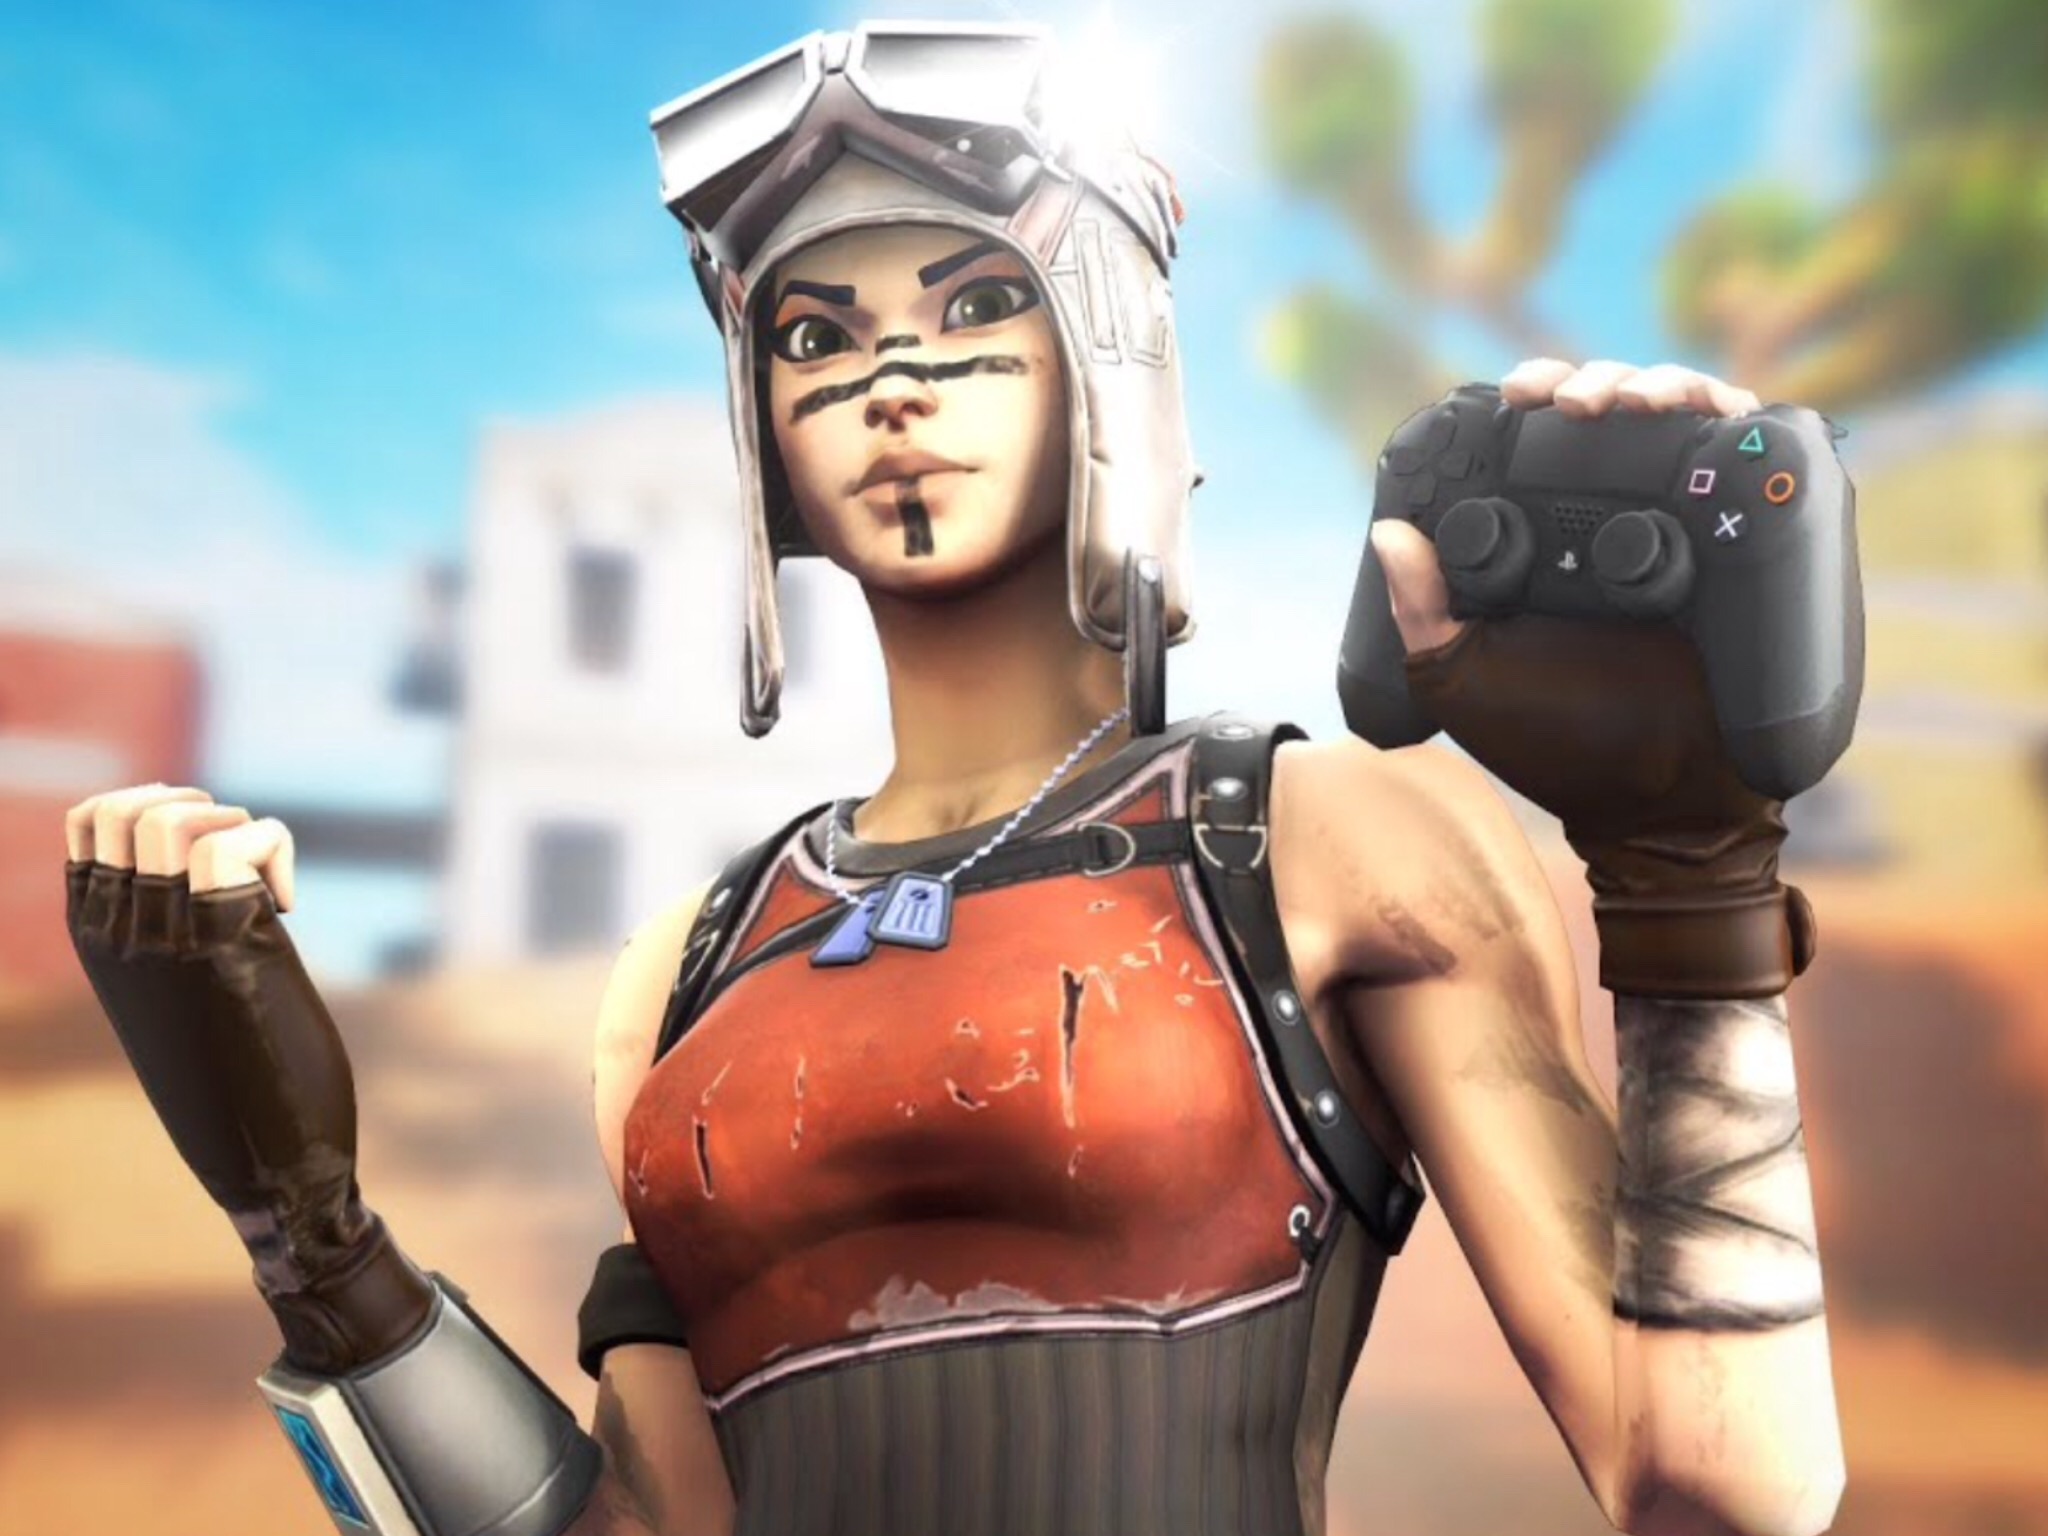 freetoedit Fortnite Renegade Raider ps4 image by @gxd_sil3nt.